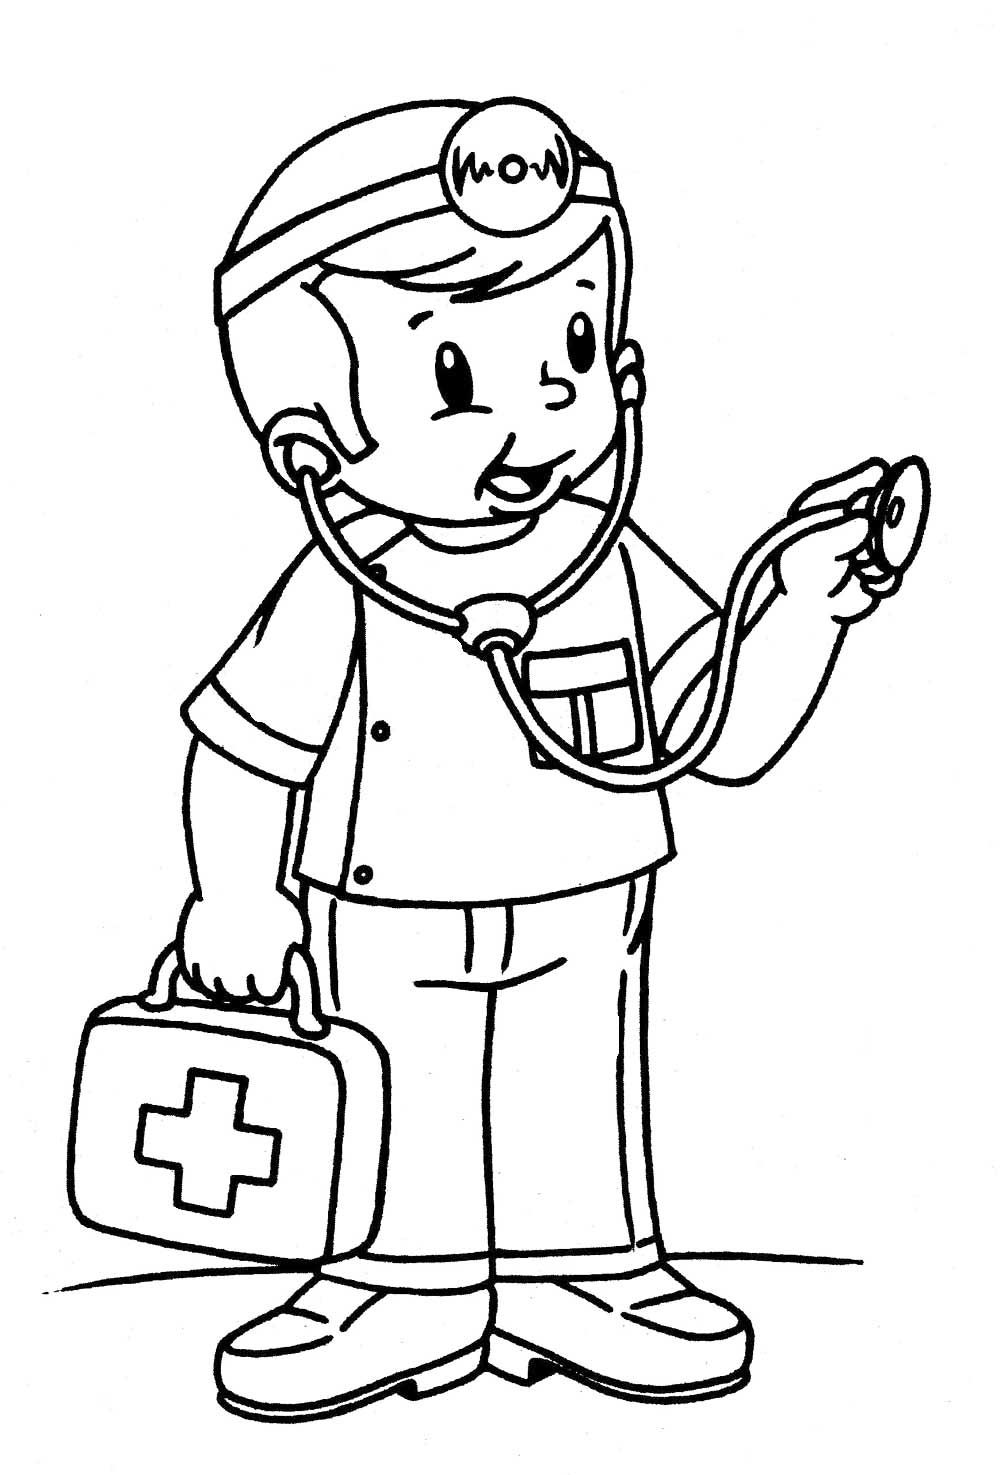 Coloring Page Doctor - free printable coloring pages - Img 17659